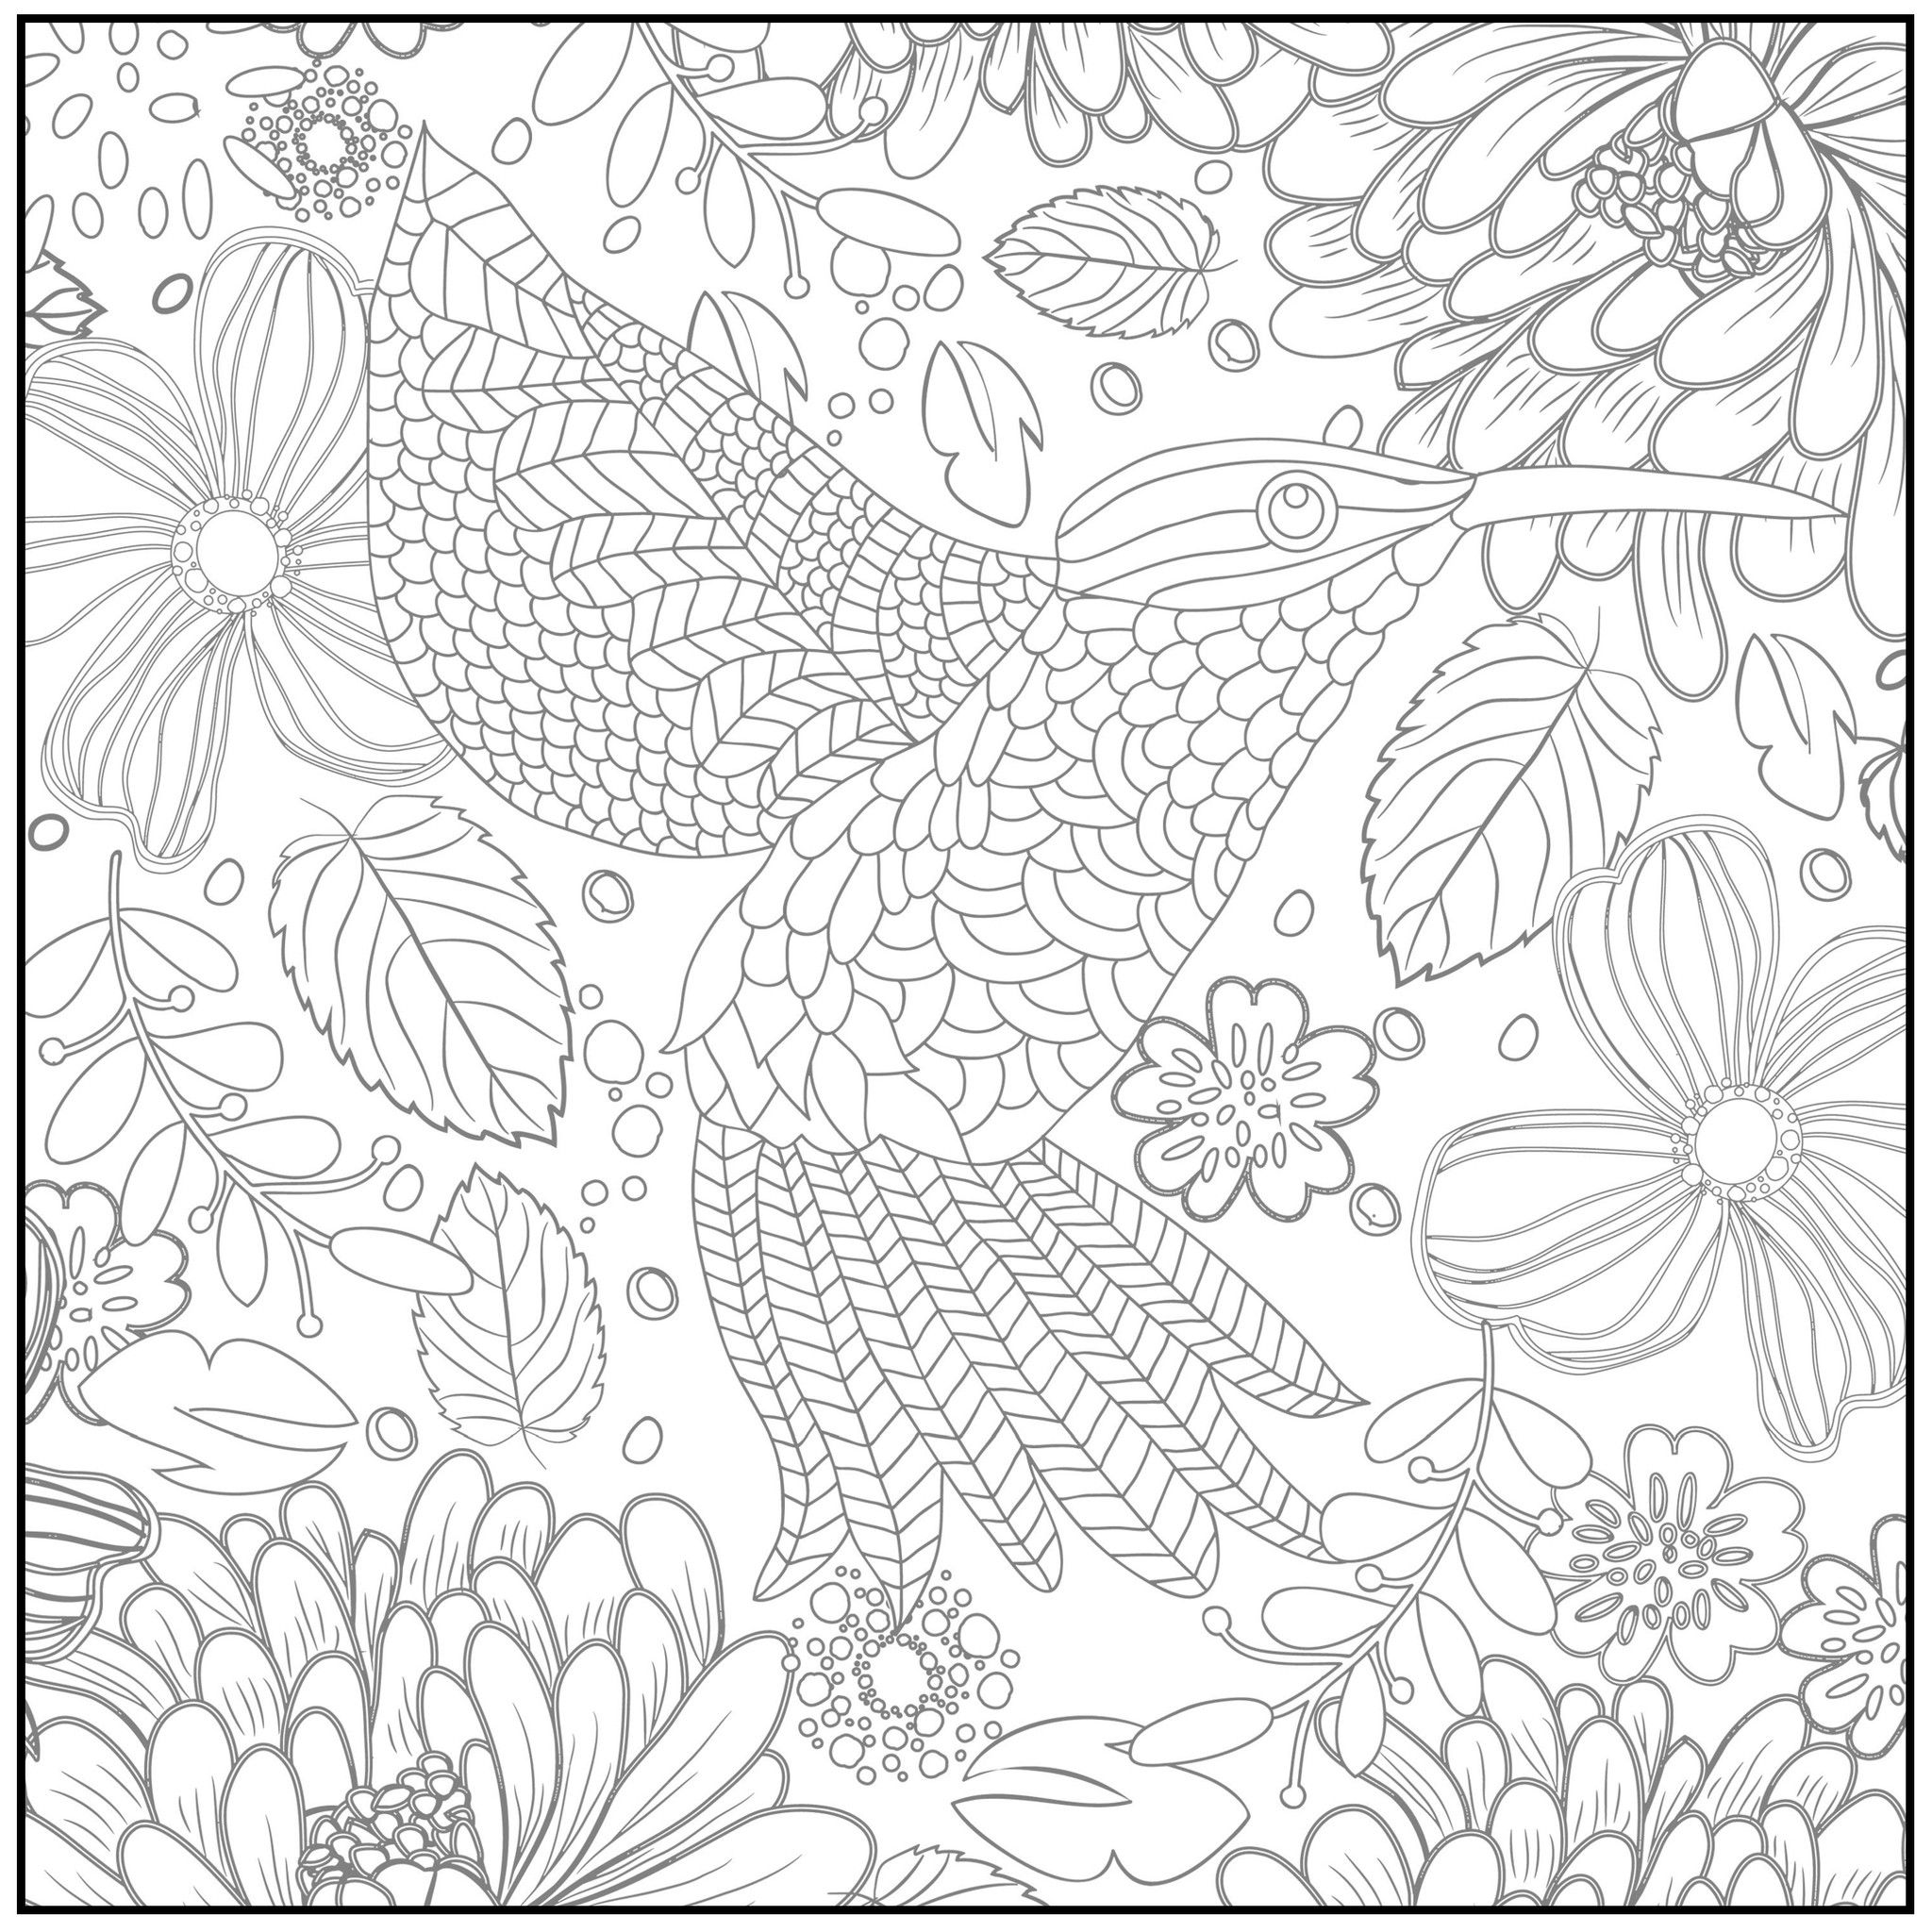 Shop Adult Coloring Books tagged "Spring Time" - ColorWithMusic